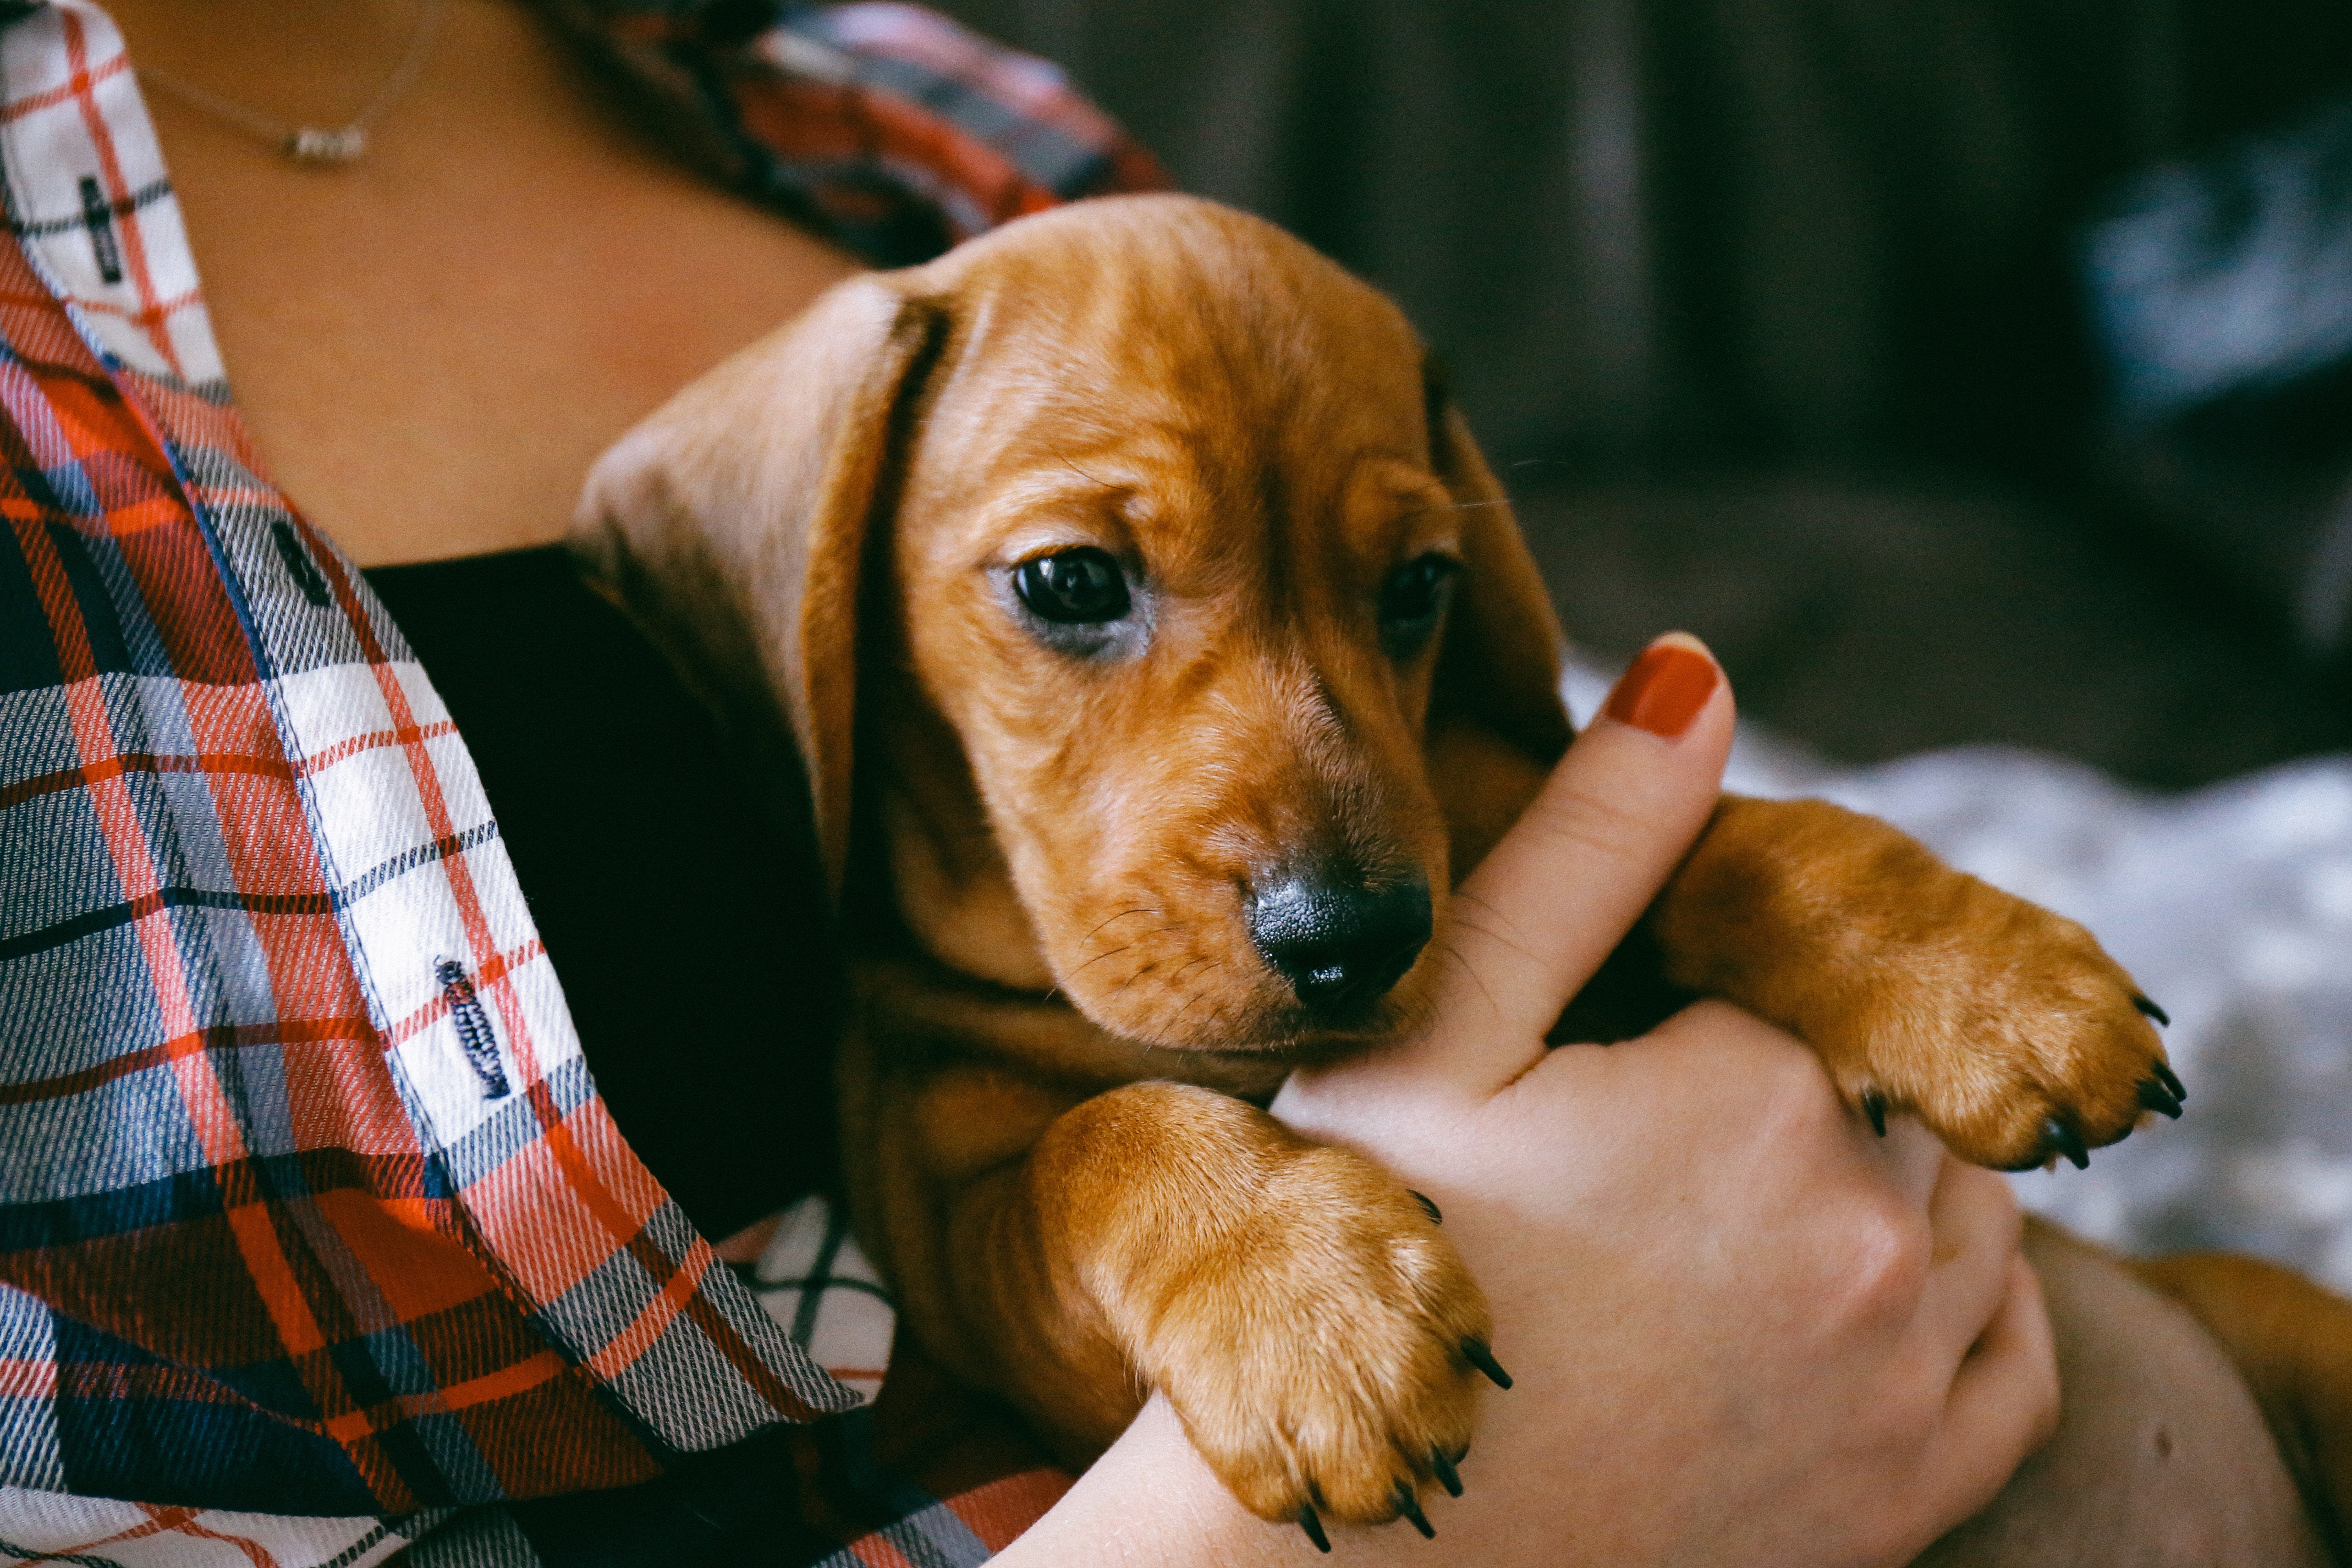 Getting a Puppy: 10 Things you Should do Before Bringing them Home